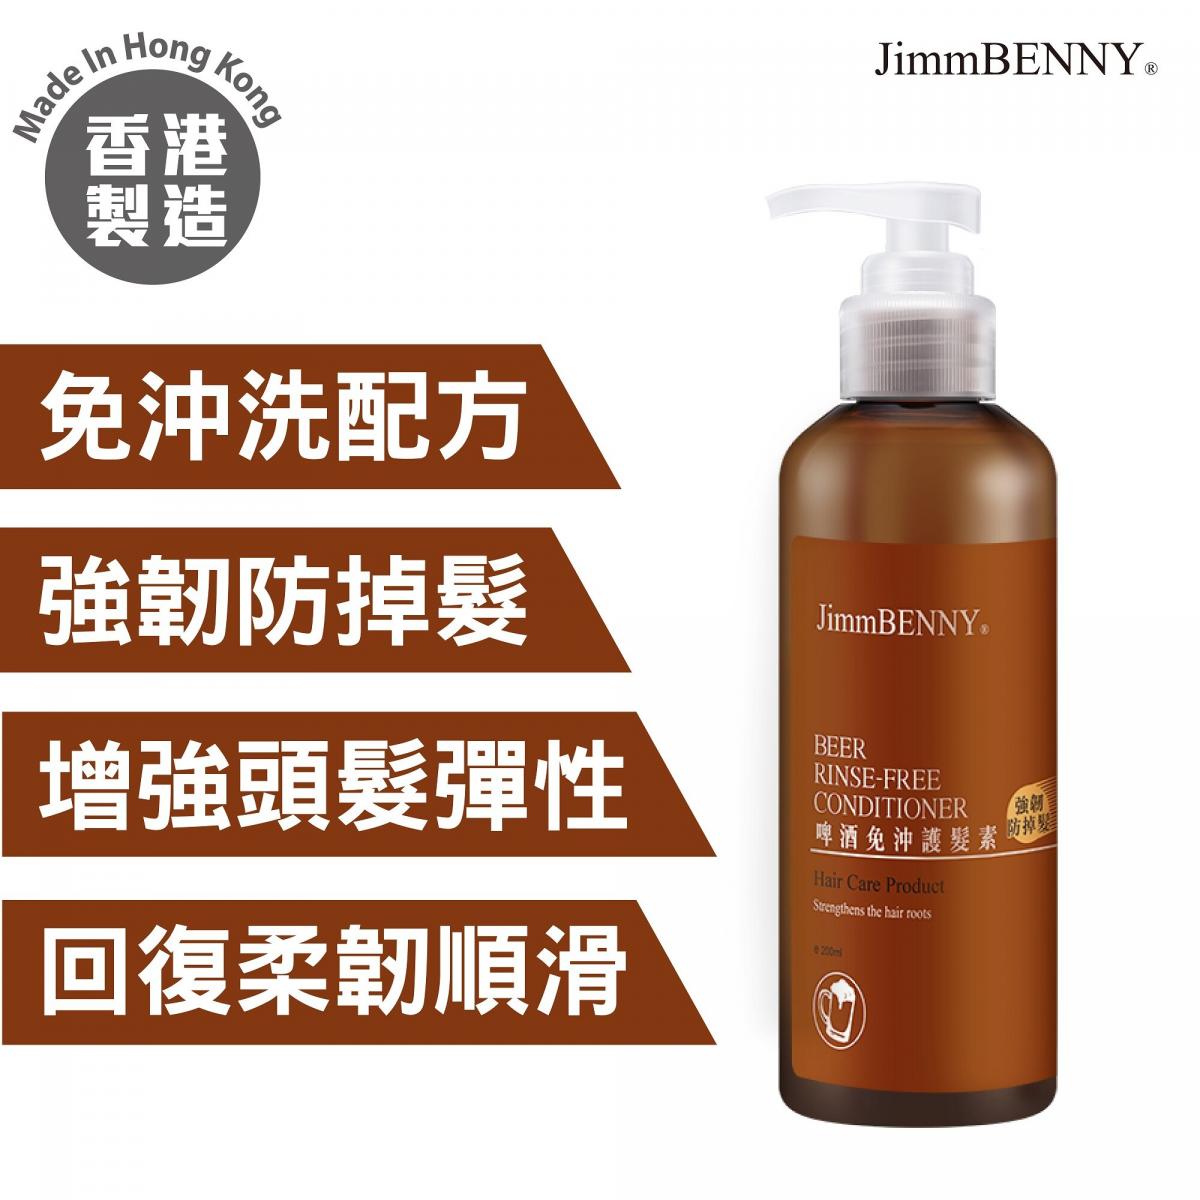 Beer Rinse-free Conditioner (200ml)